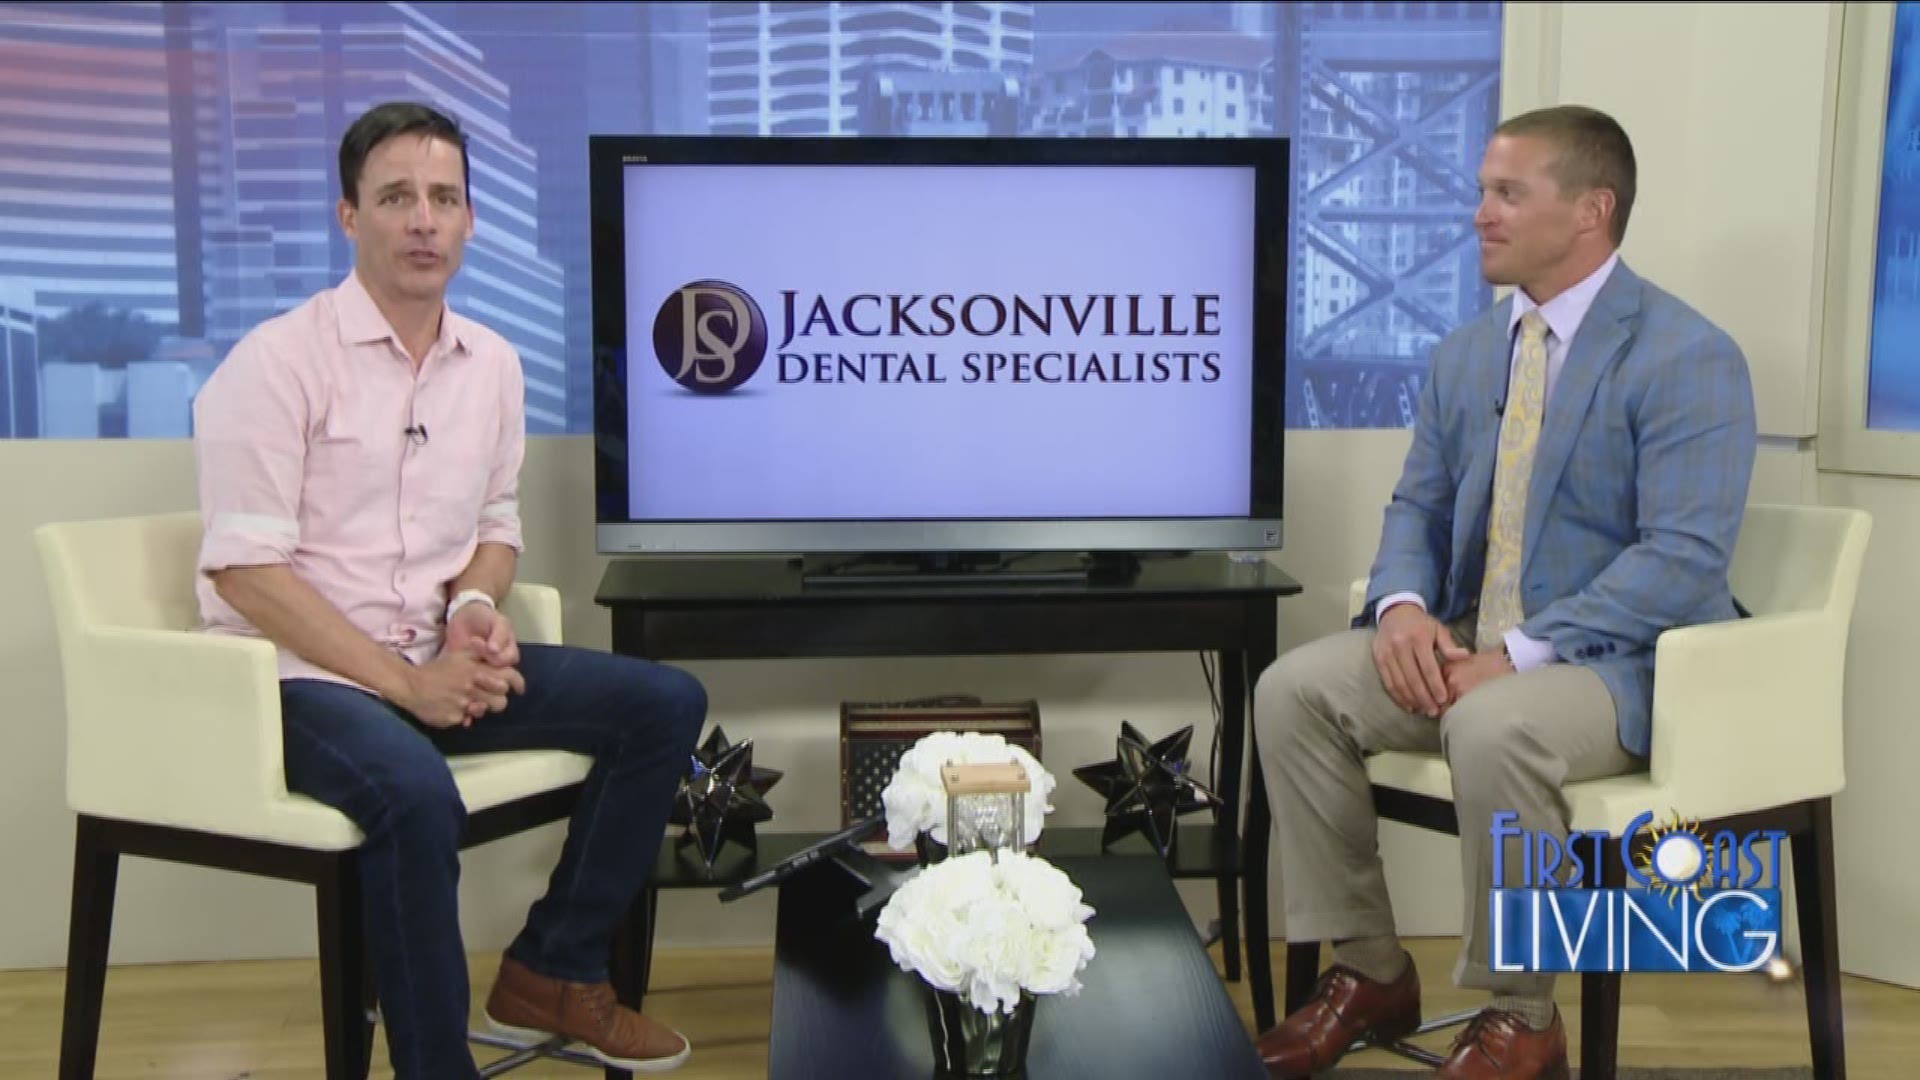 Dr Nawrocki is here to talk about Your Smile